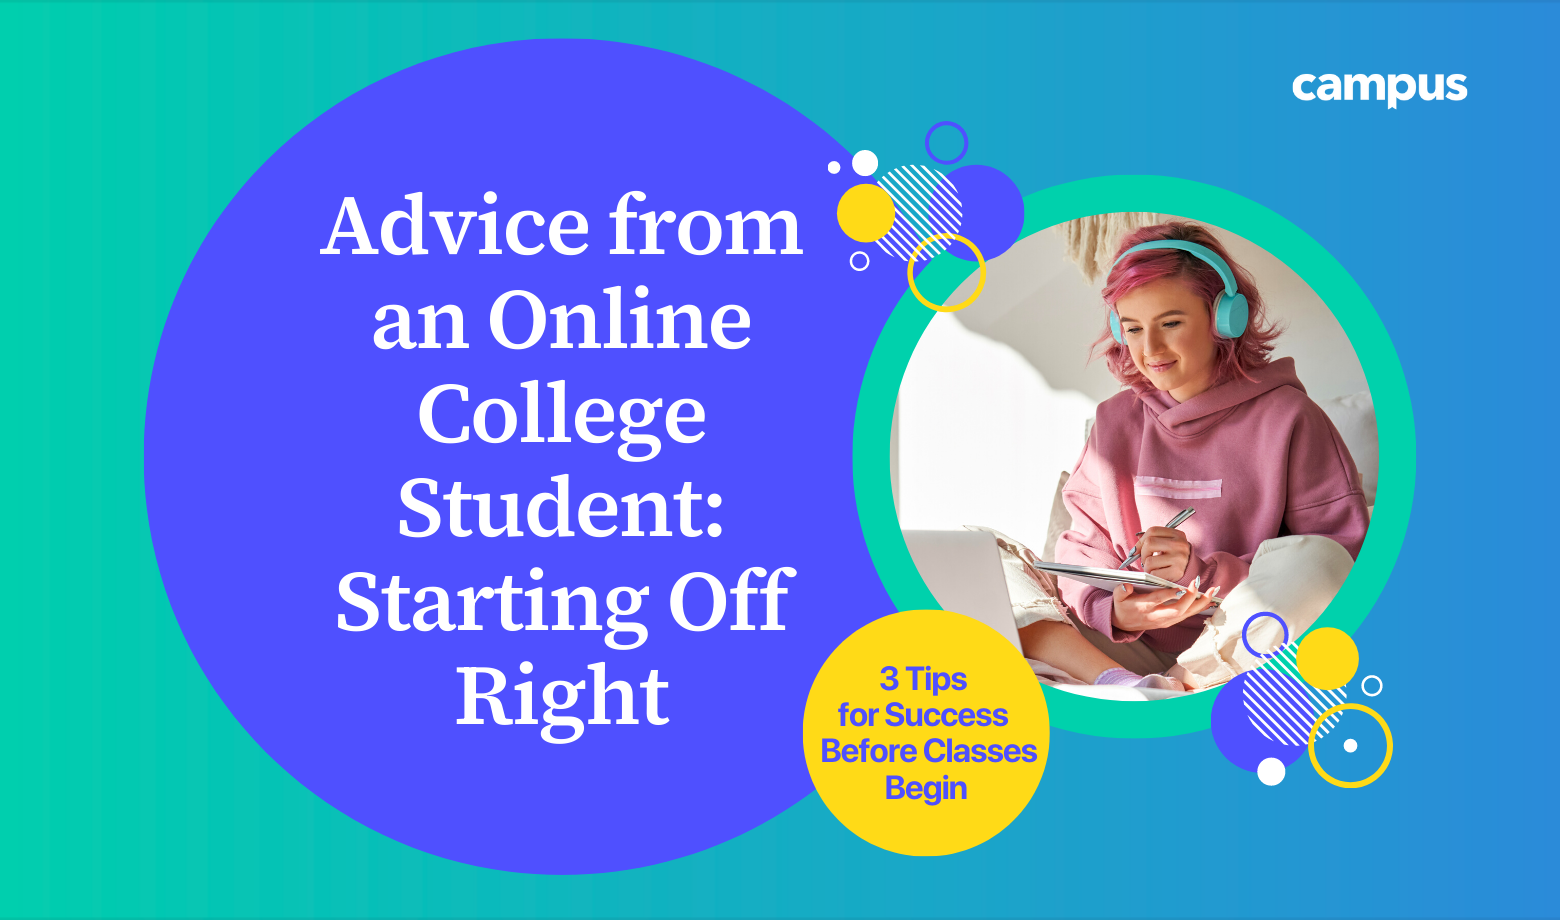 Tips for Success in Online College (from an Online College Student)